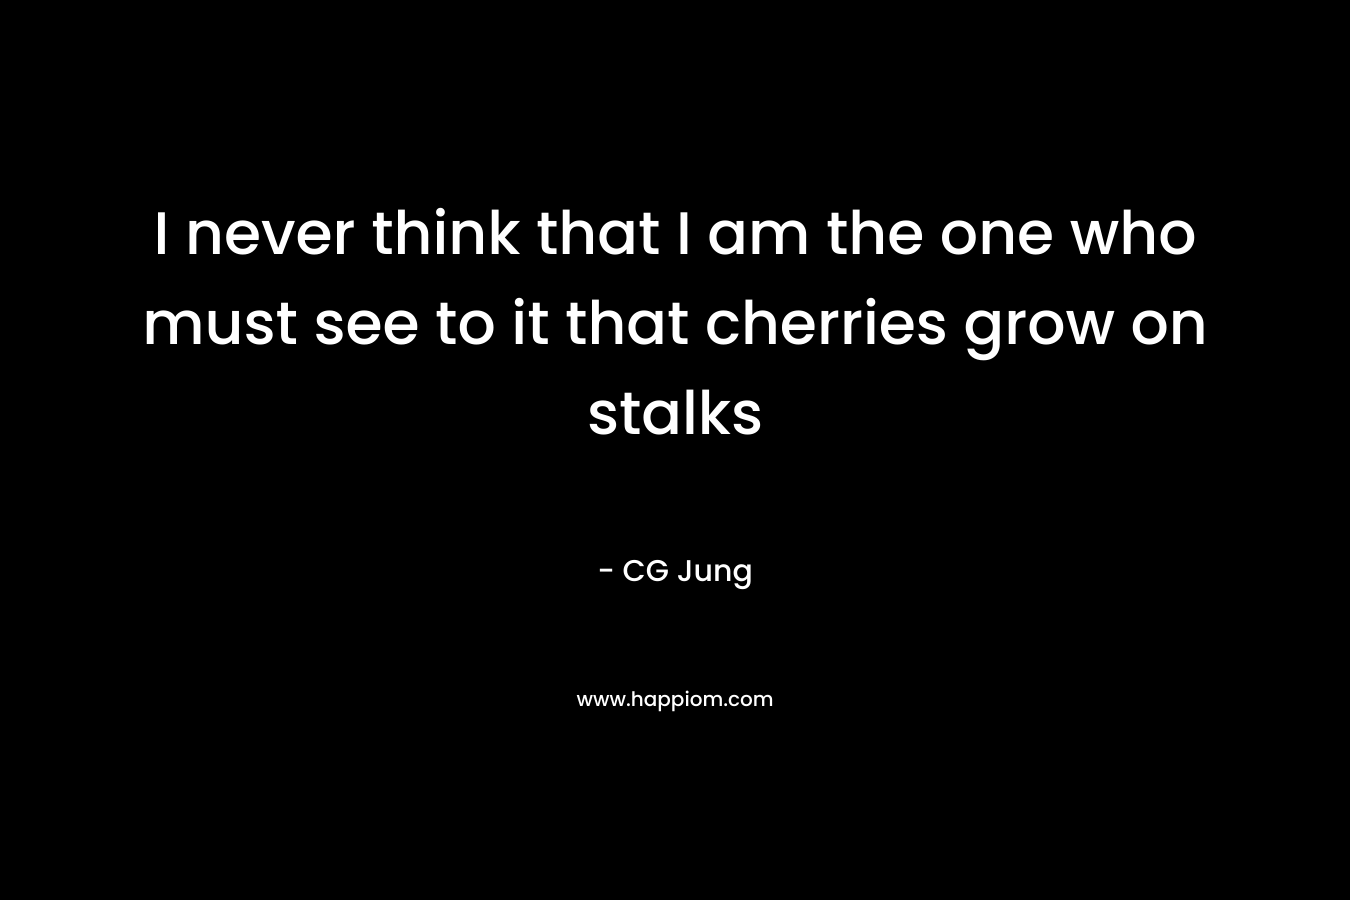 I never think that I am the one who must see to it that cherries grow on stalks